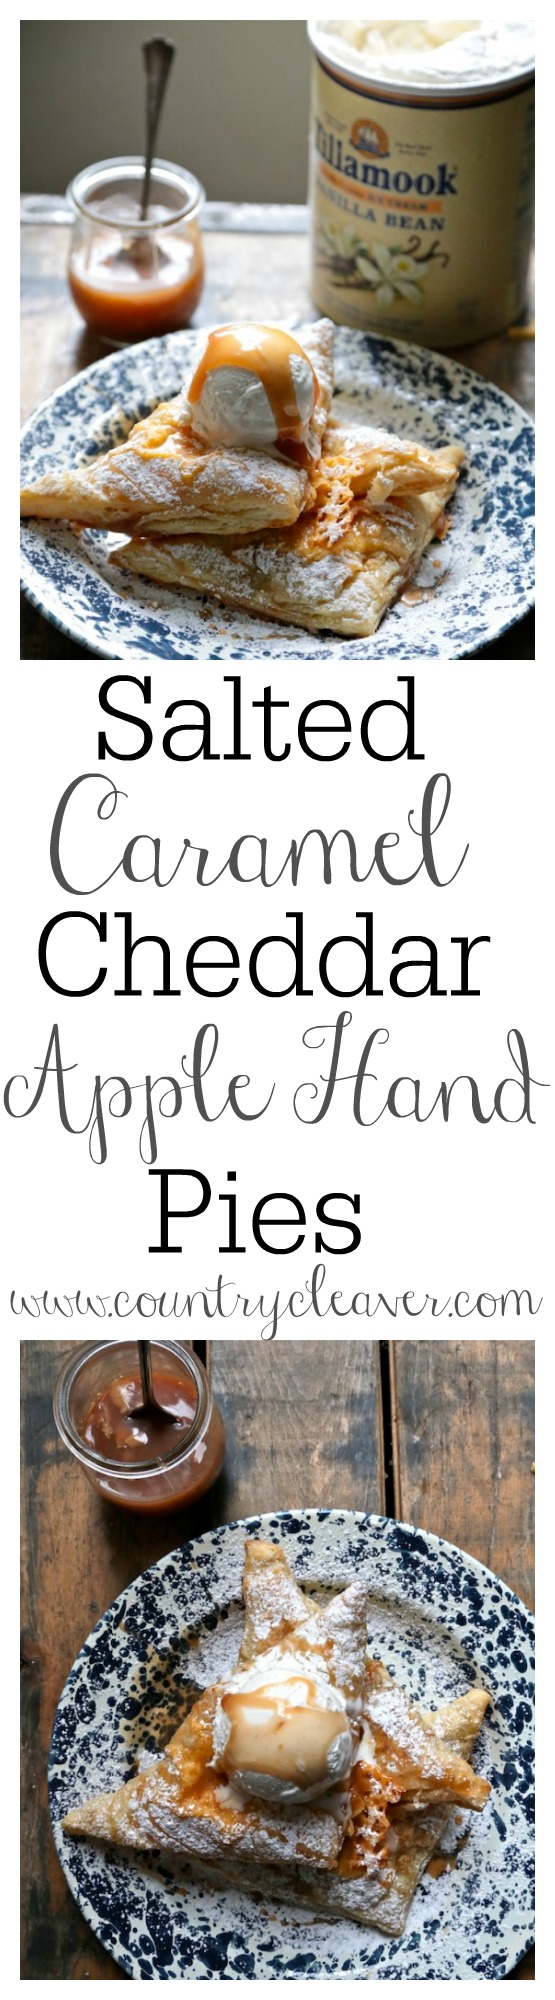 Salted Caramel Cheddar Apple Hand Pies